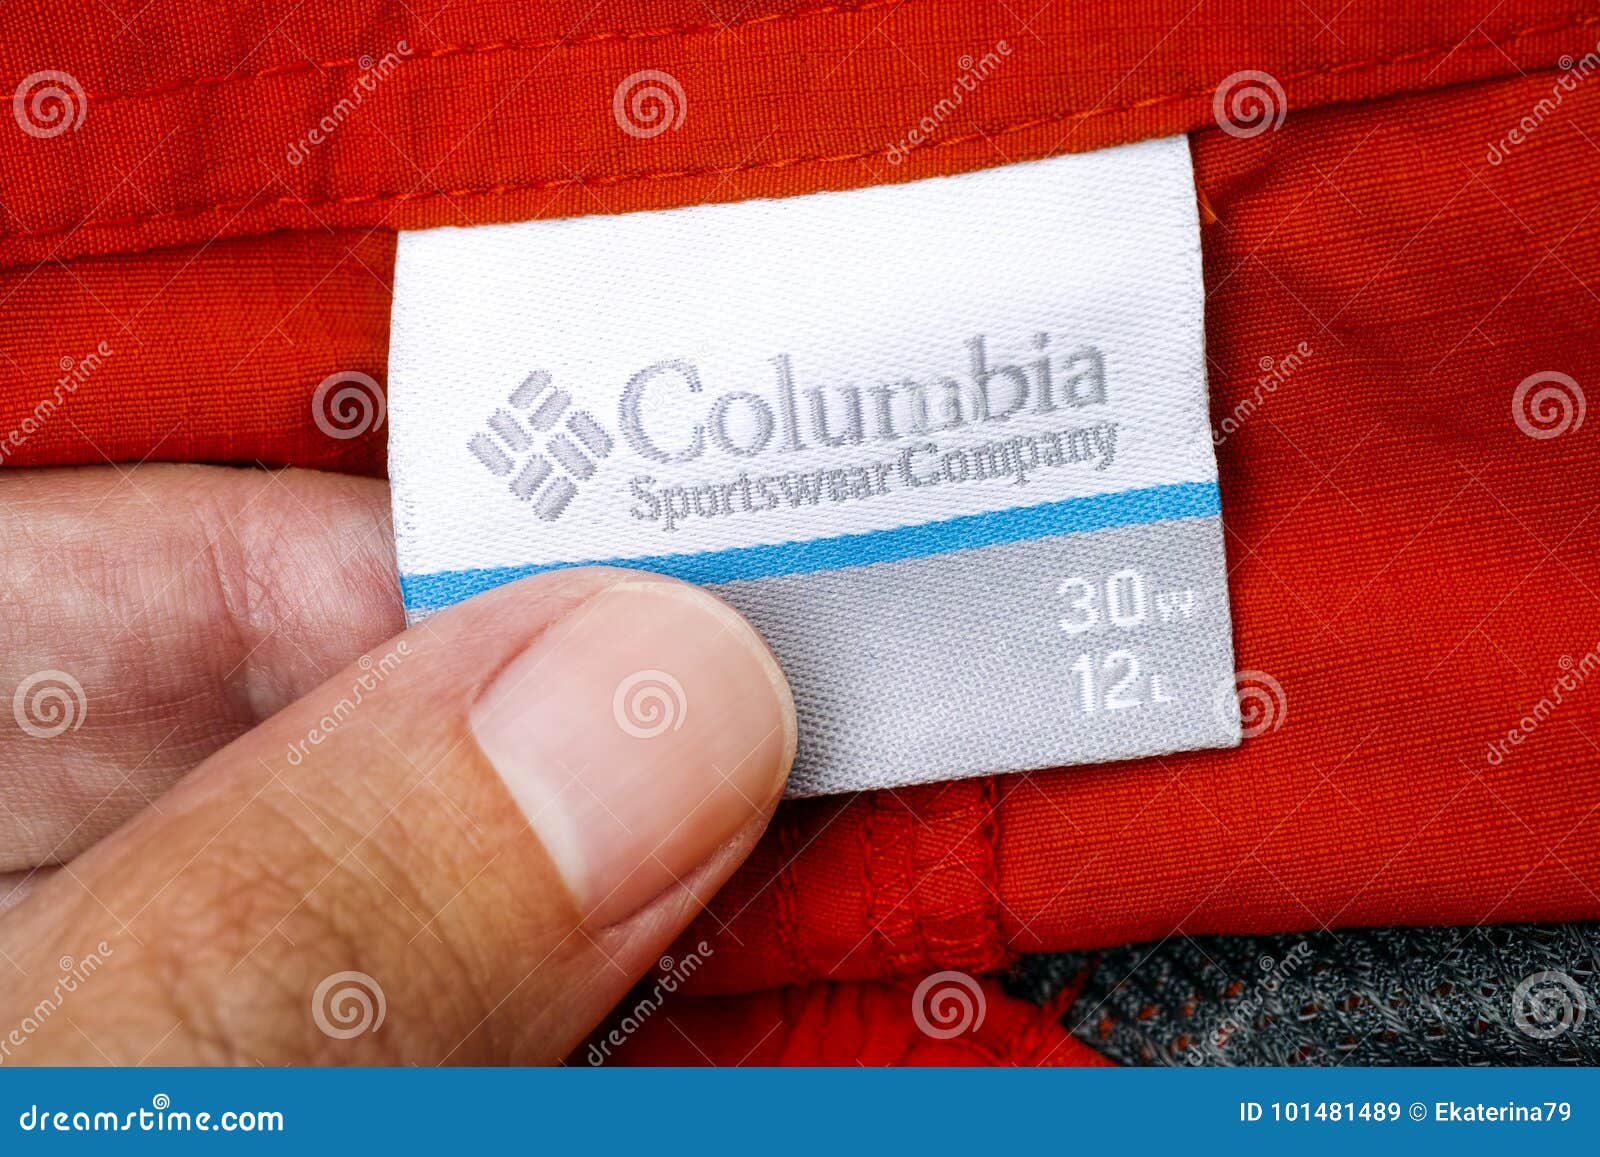 Person Hand with Columbia Sportswear Company Clothes Label